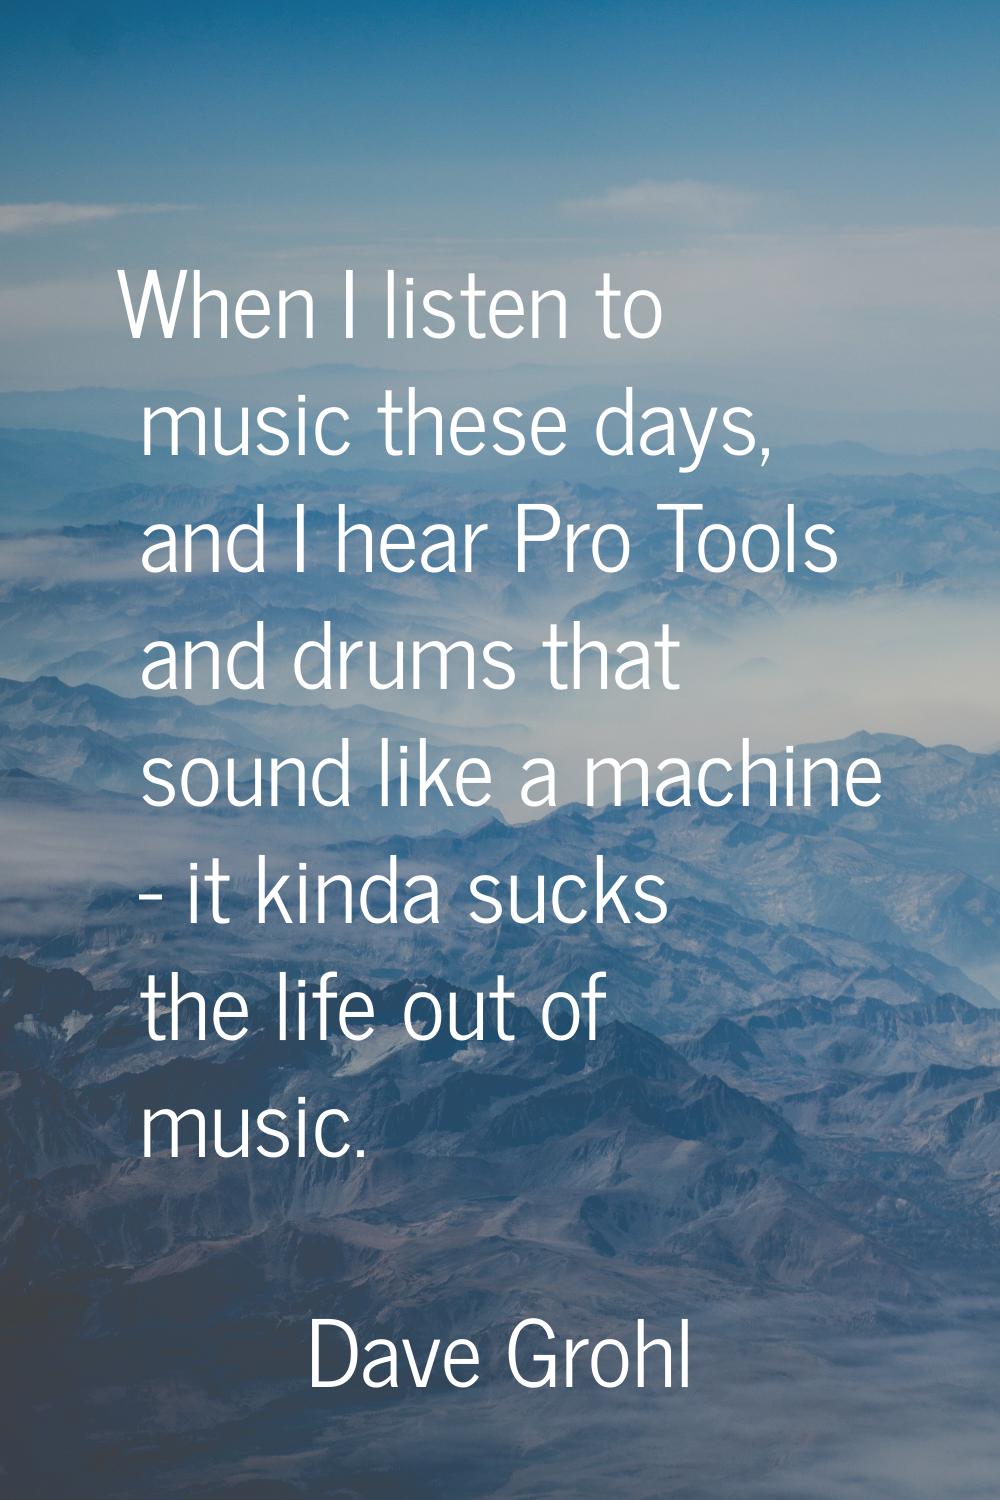 When I listen to music these days, and I hear Pro Tools and drums that sound like a machine - it ki